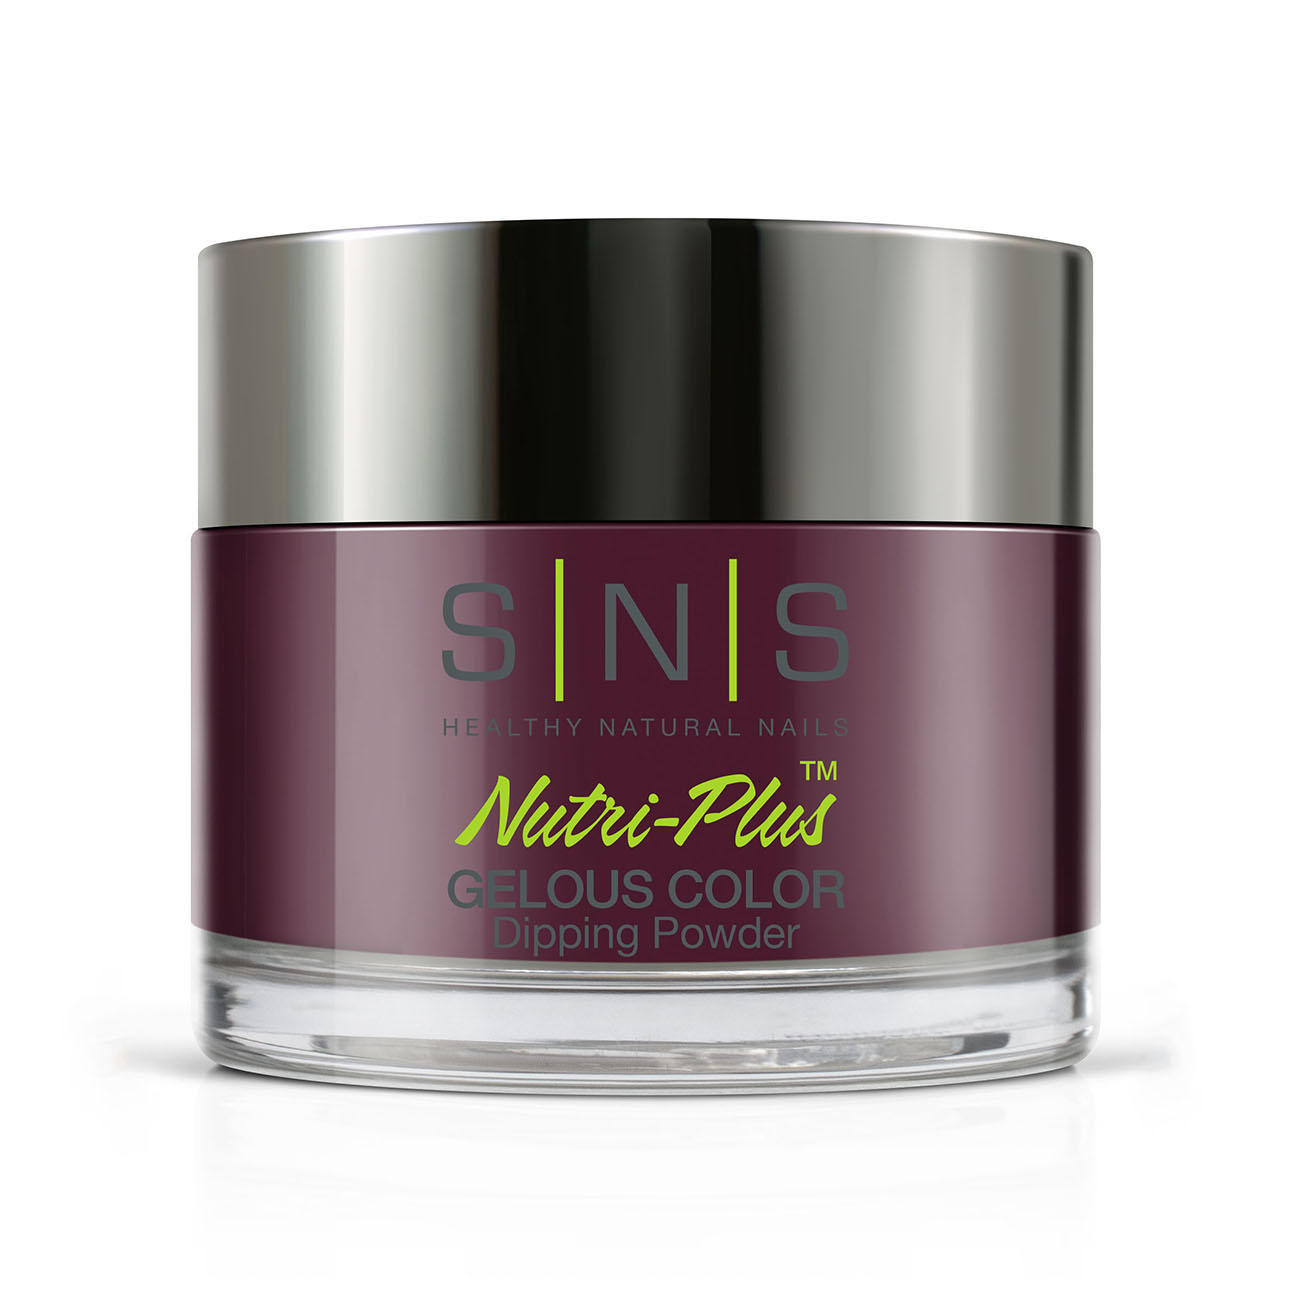 SNS Nails # 37 My First Date 28g (1oz) | Gelous Dipping Powder